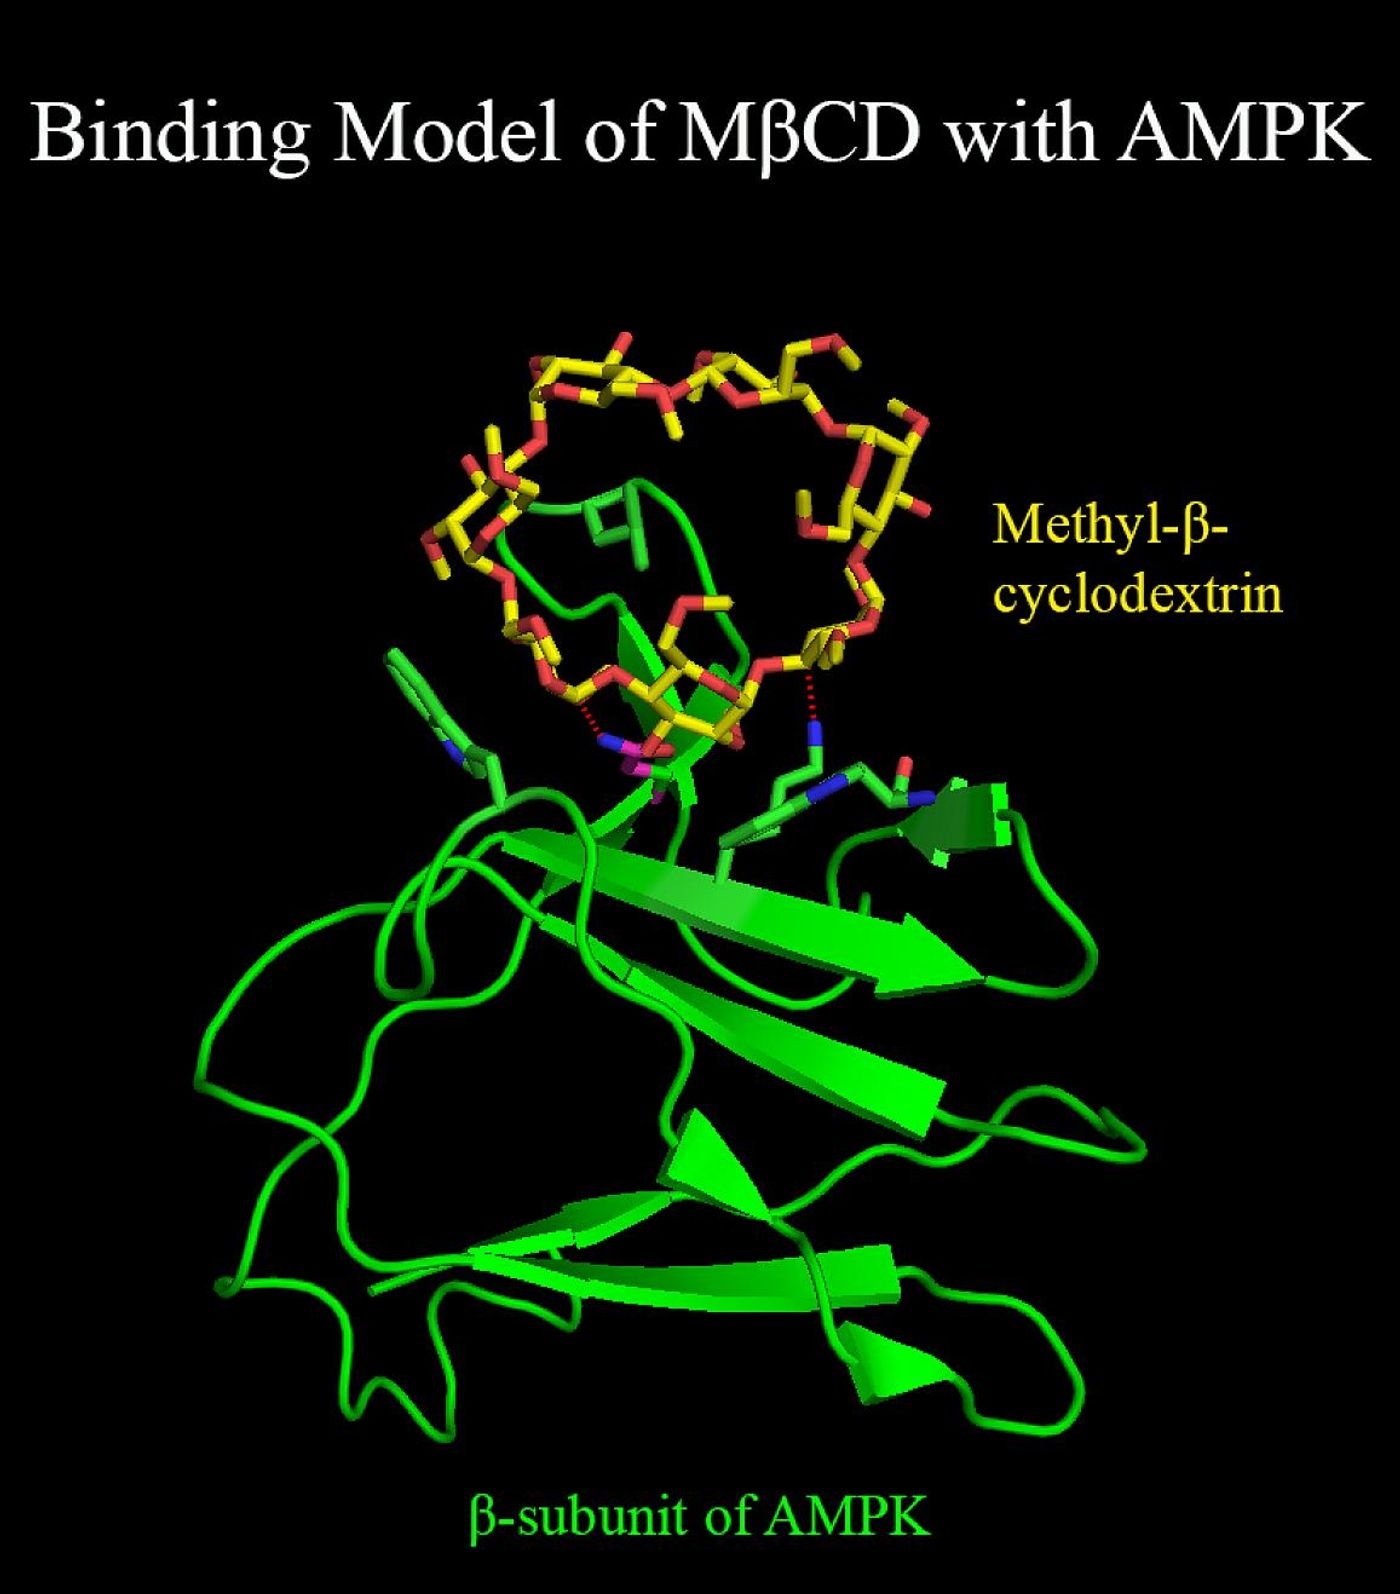 The compound methyl-β-cyclodextrin turns on an enzyme, AMPK, triggering a response against a rare genetic disease, NPC1. / Credit: NCATS